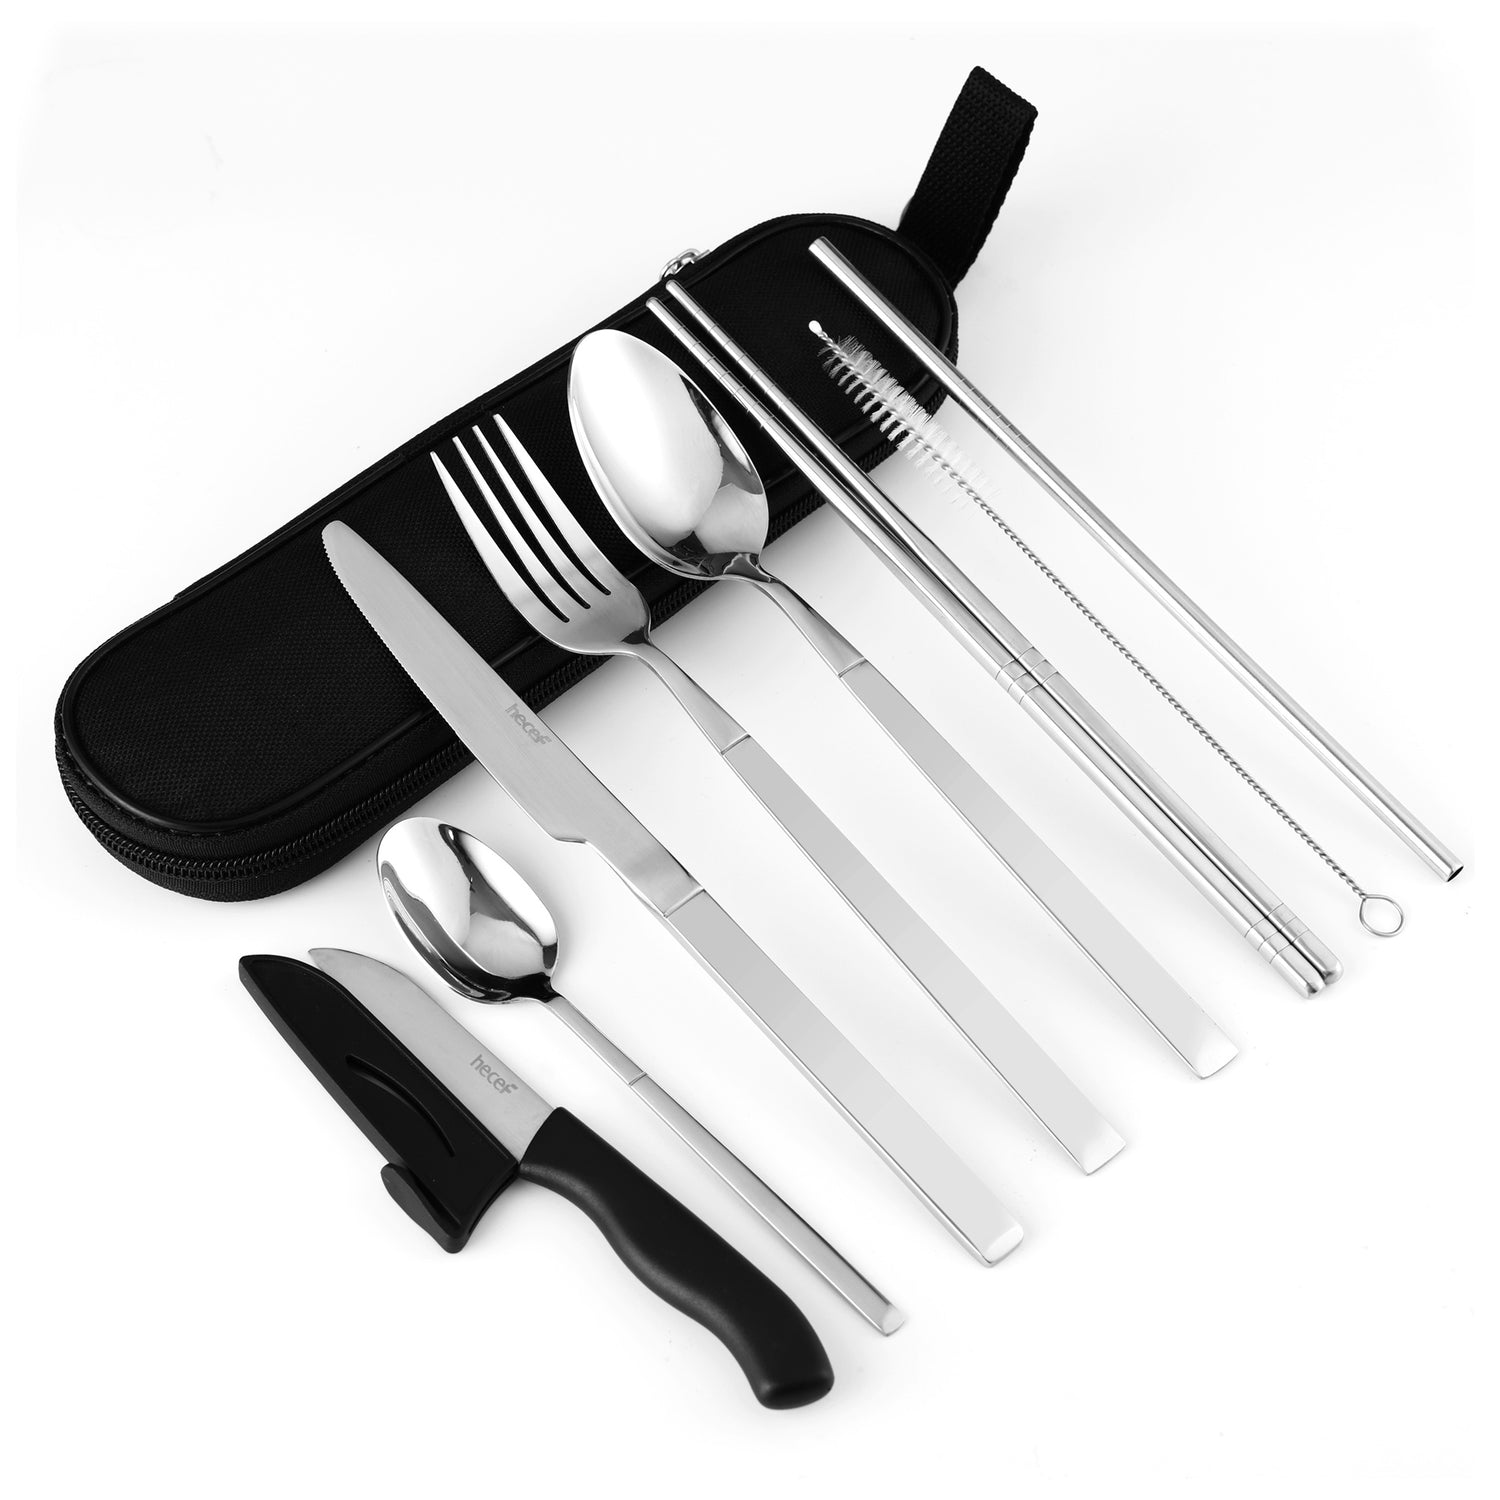 Reusable Travel Utensils,Portable Stainless Steel Flatware Cutlery Set,  Camping Silverware with Case,3 Pieces Tableware, Knife,Spoon,Fork,for Lunch  Box Workplace Camping School Picnic 